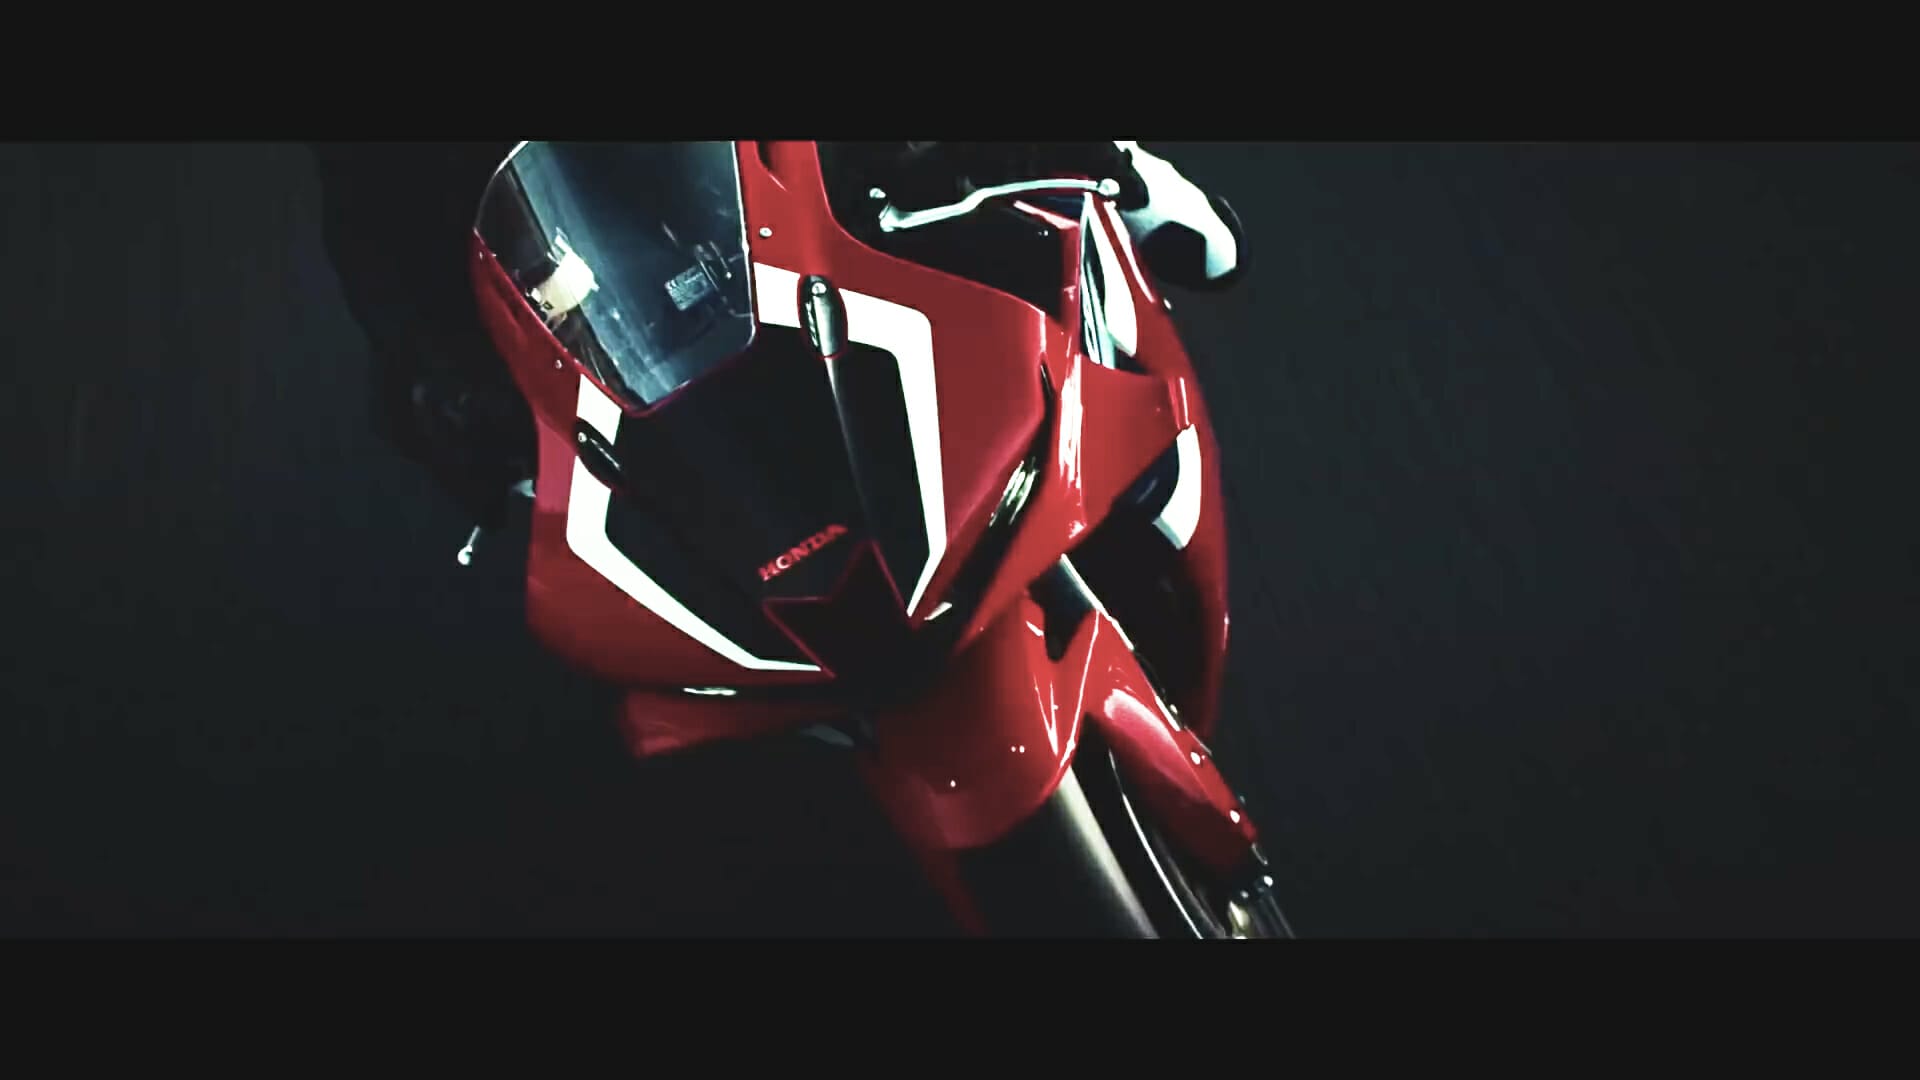 New Honda CBR 600RR is coming
- also in the App MOTORCYCLE NEWS